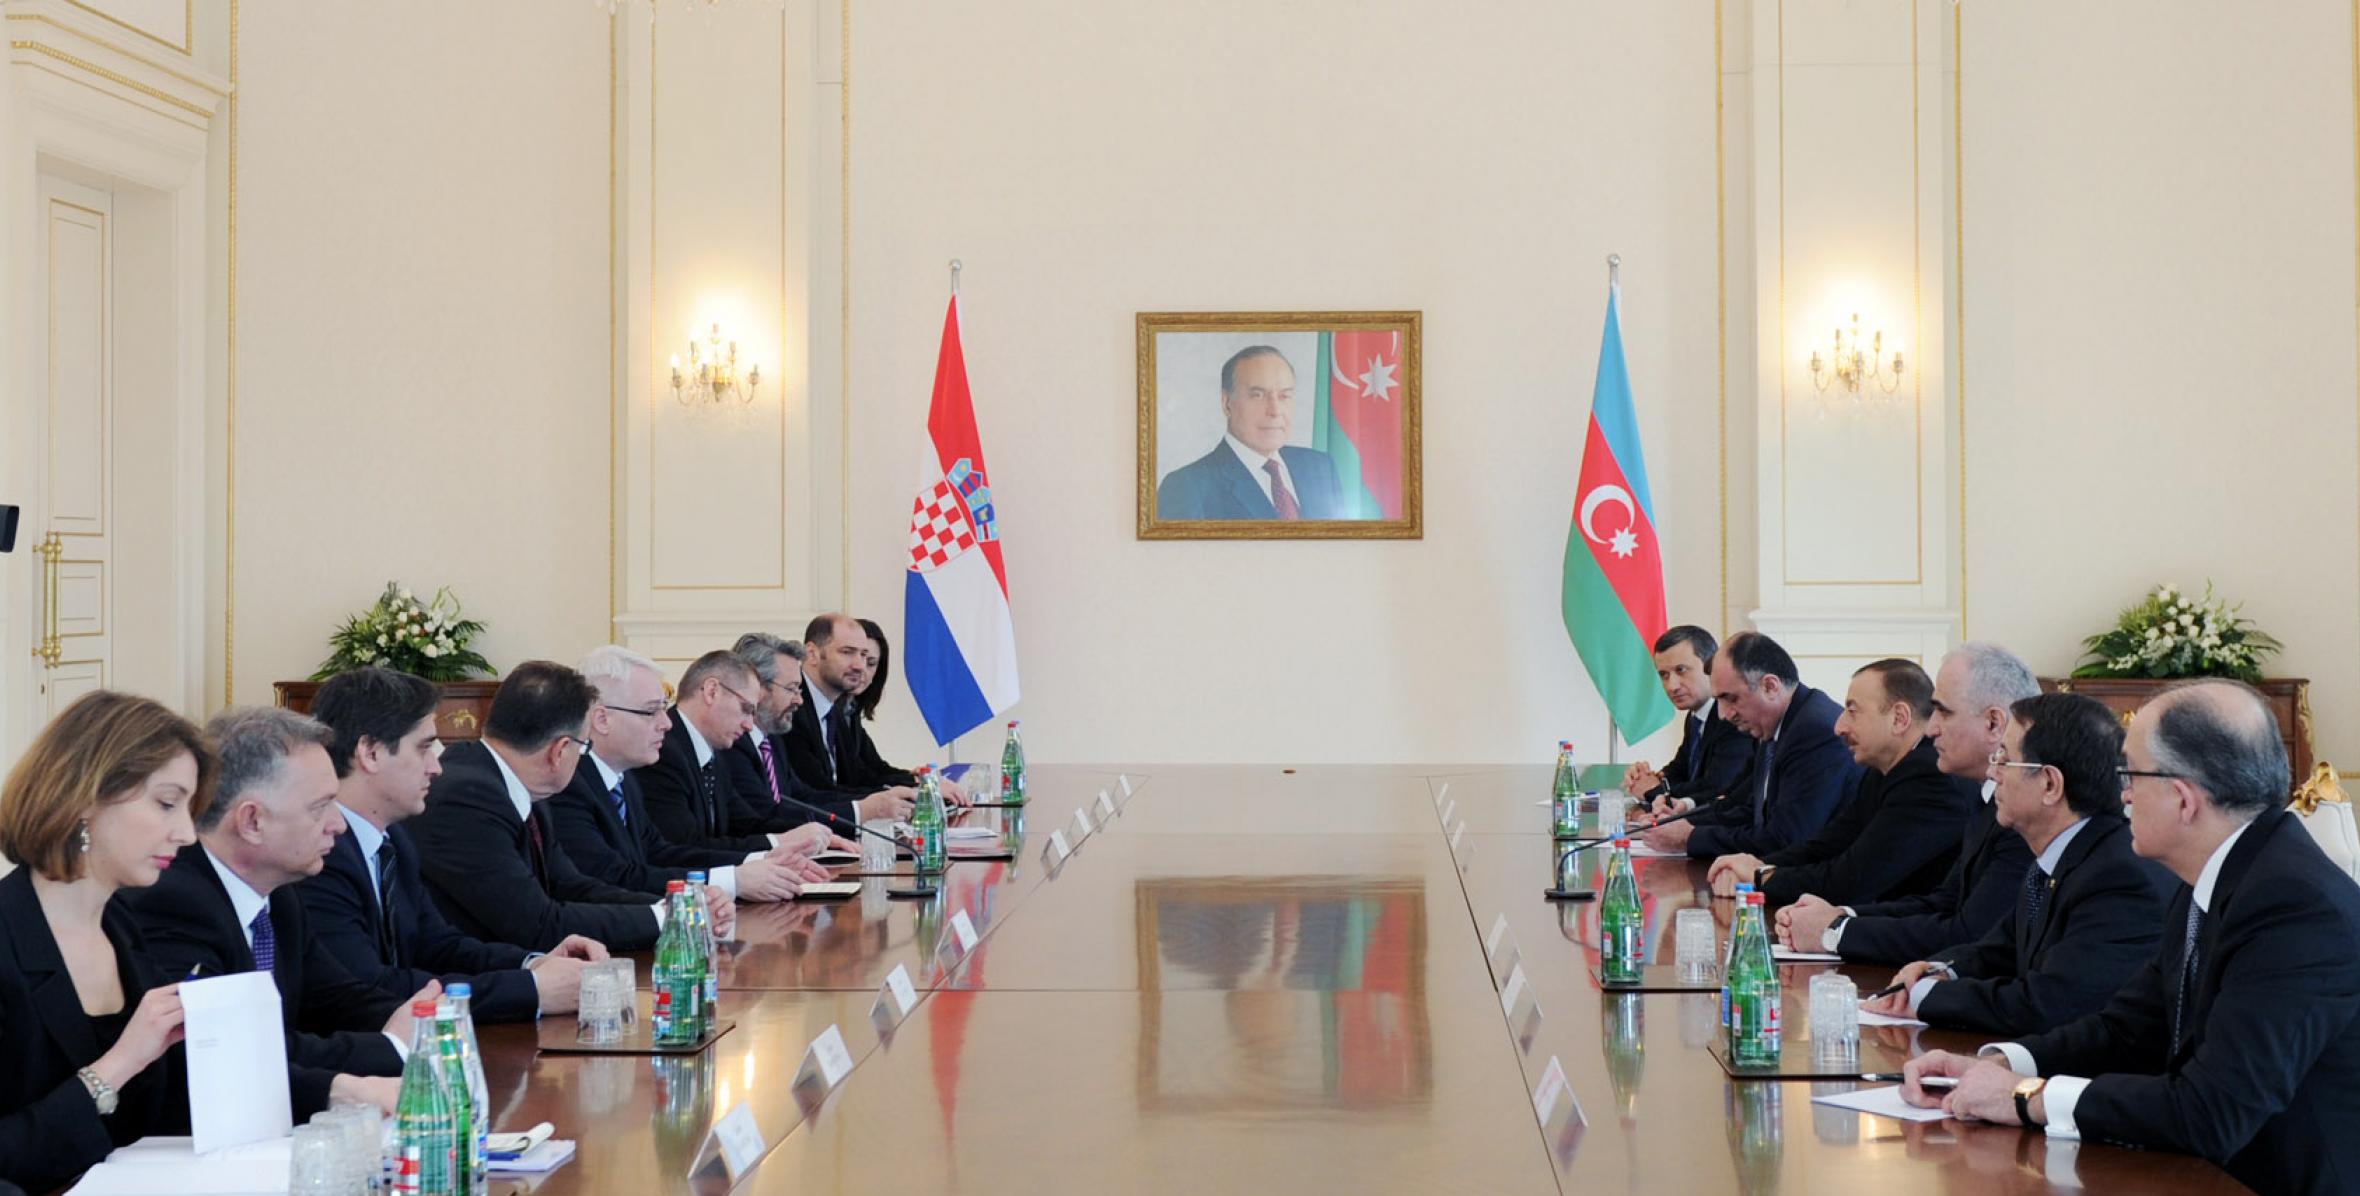 Ilham Aliyev and President of the Republic of Croatia Ivo Josipović held a meeting in an expanded format